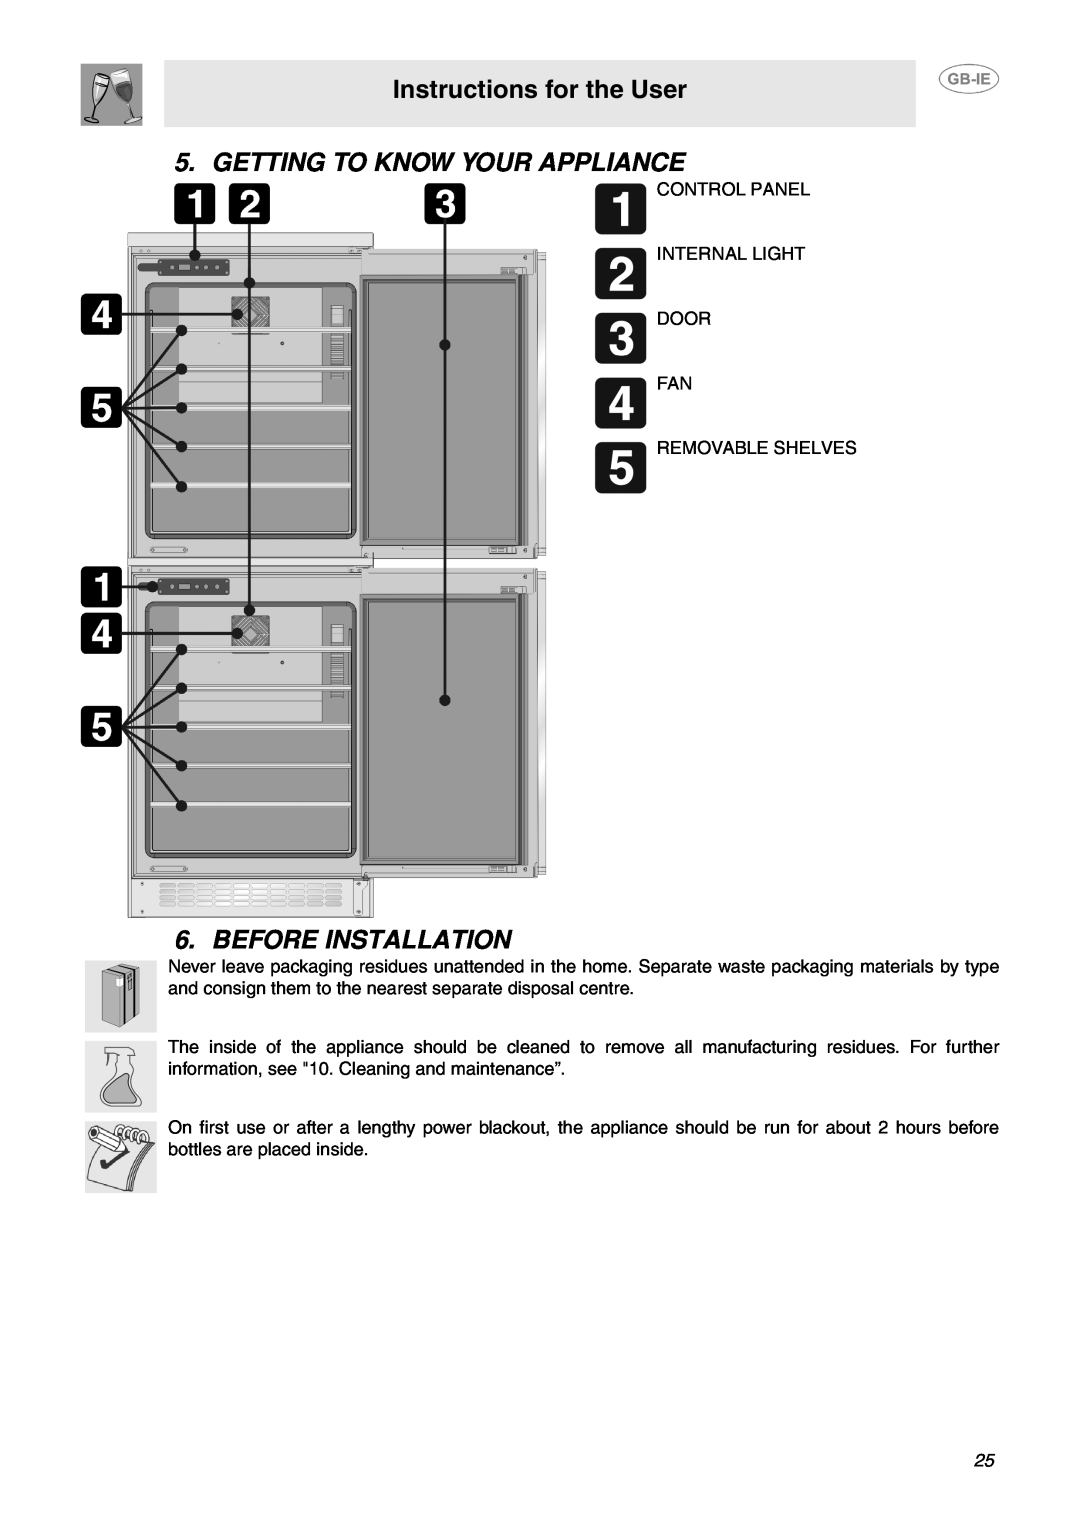 Smeg SCV36XS dimensions Instructions for the User, Getting To Know Your Appliance, Before Installation 